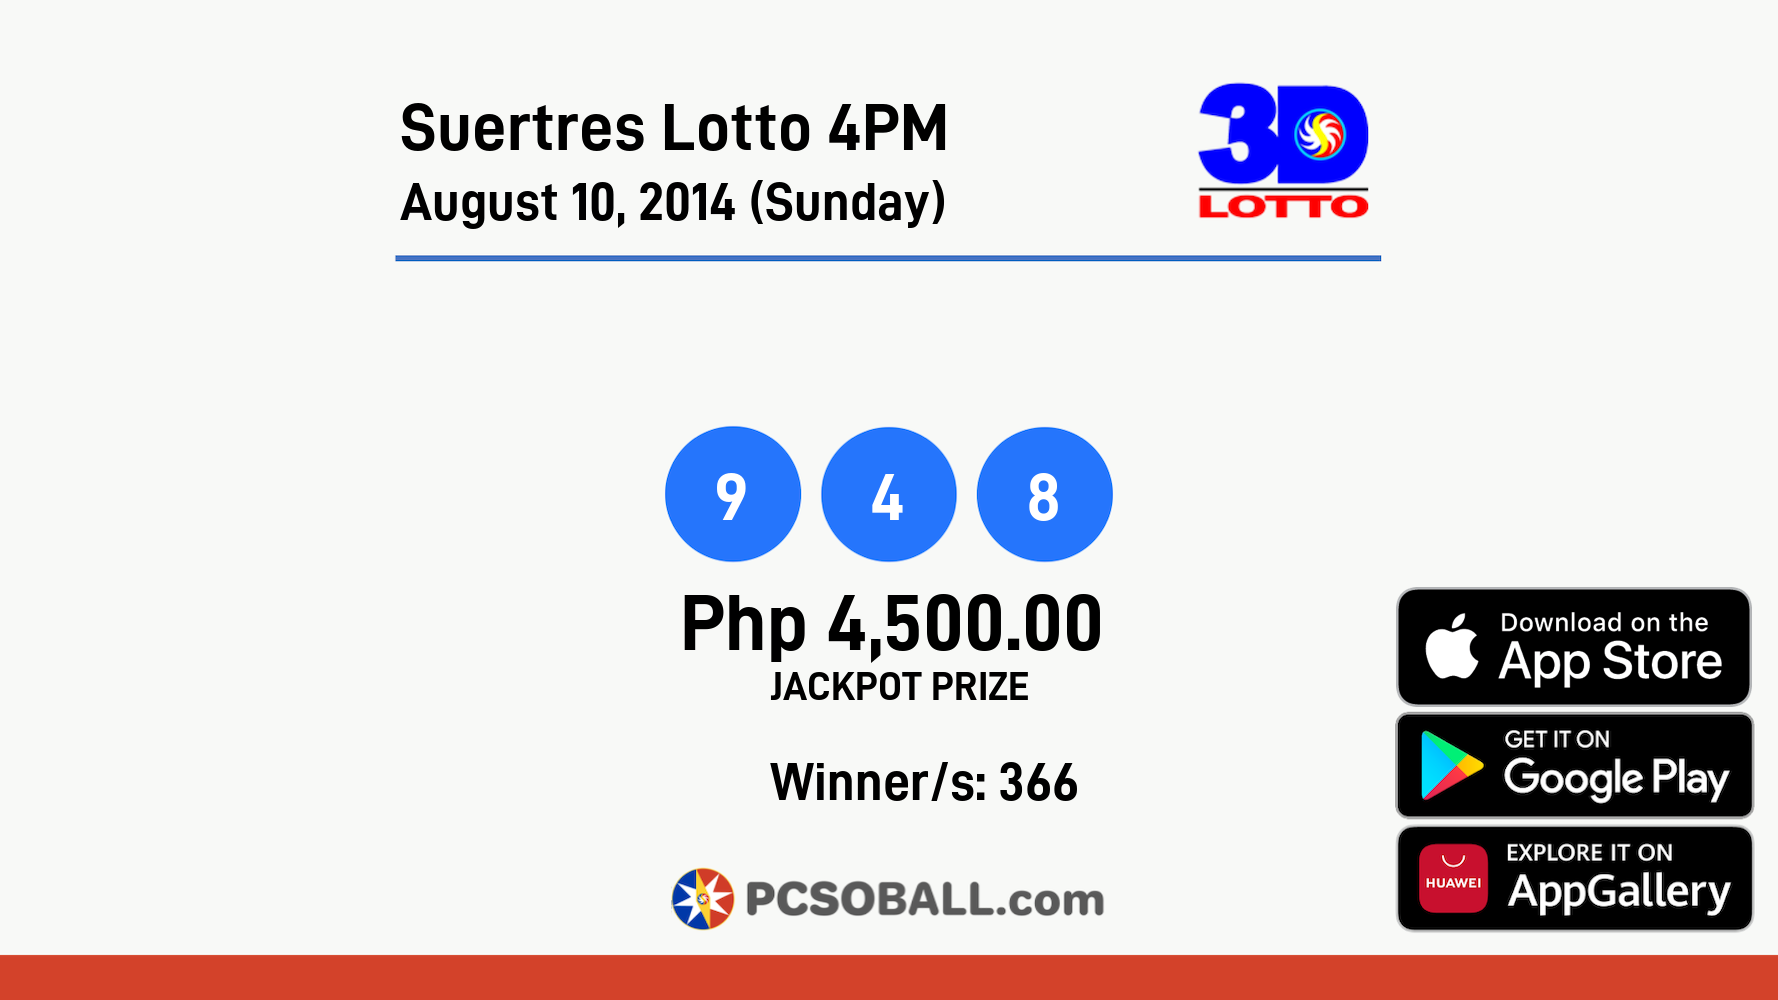 Suertres Lotto 4PM August 10, 2014 (Sunday) Result